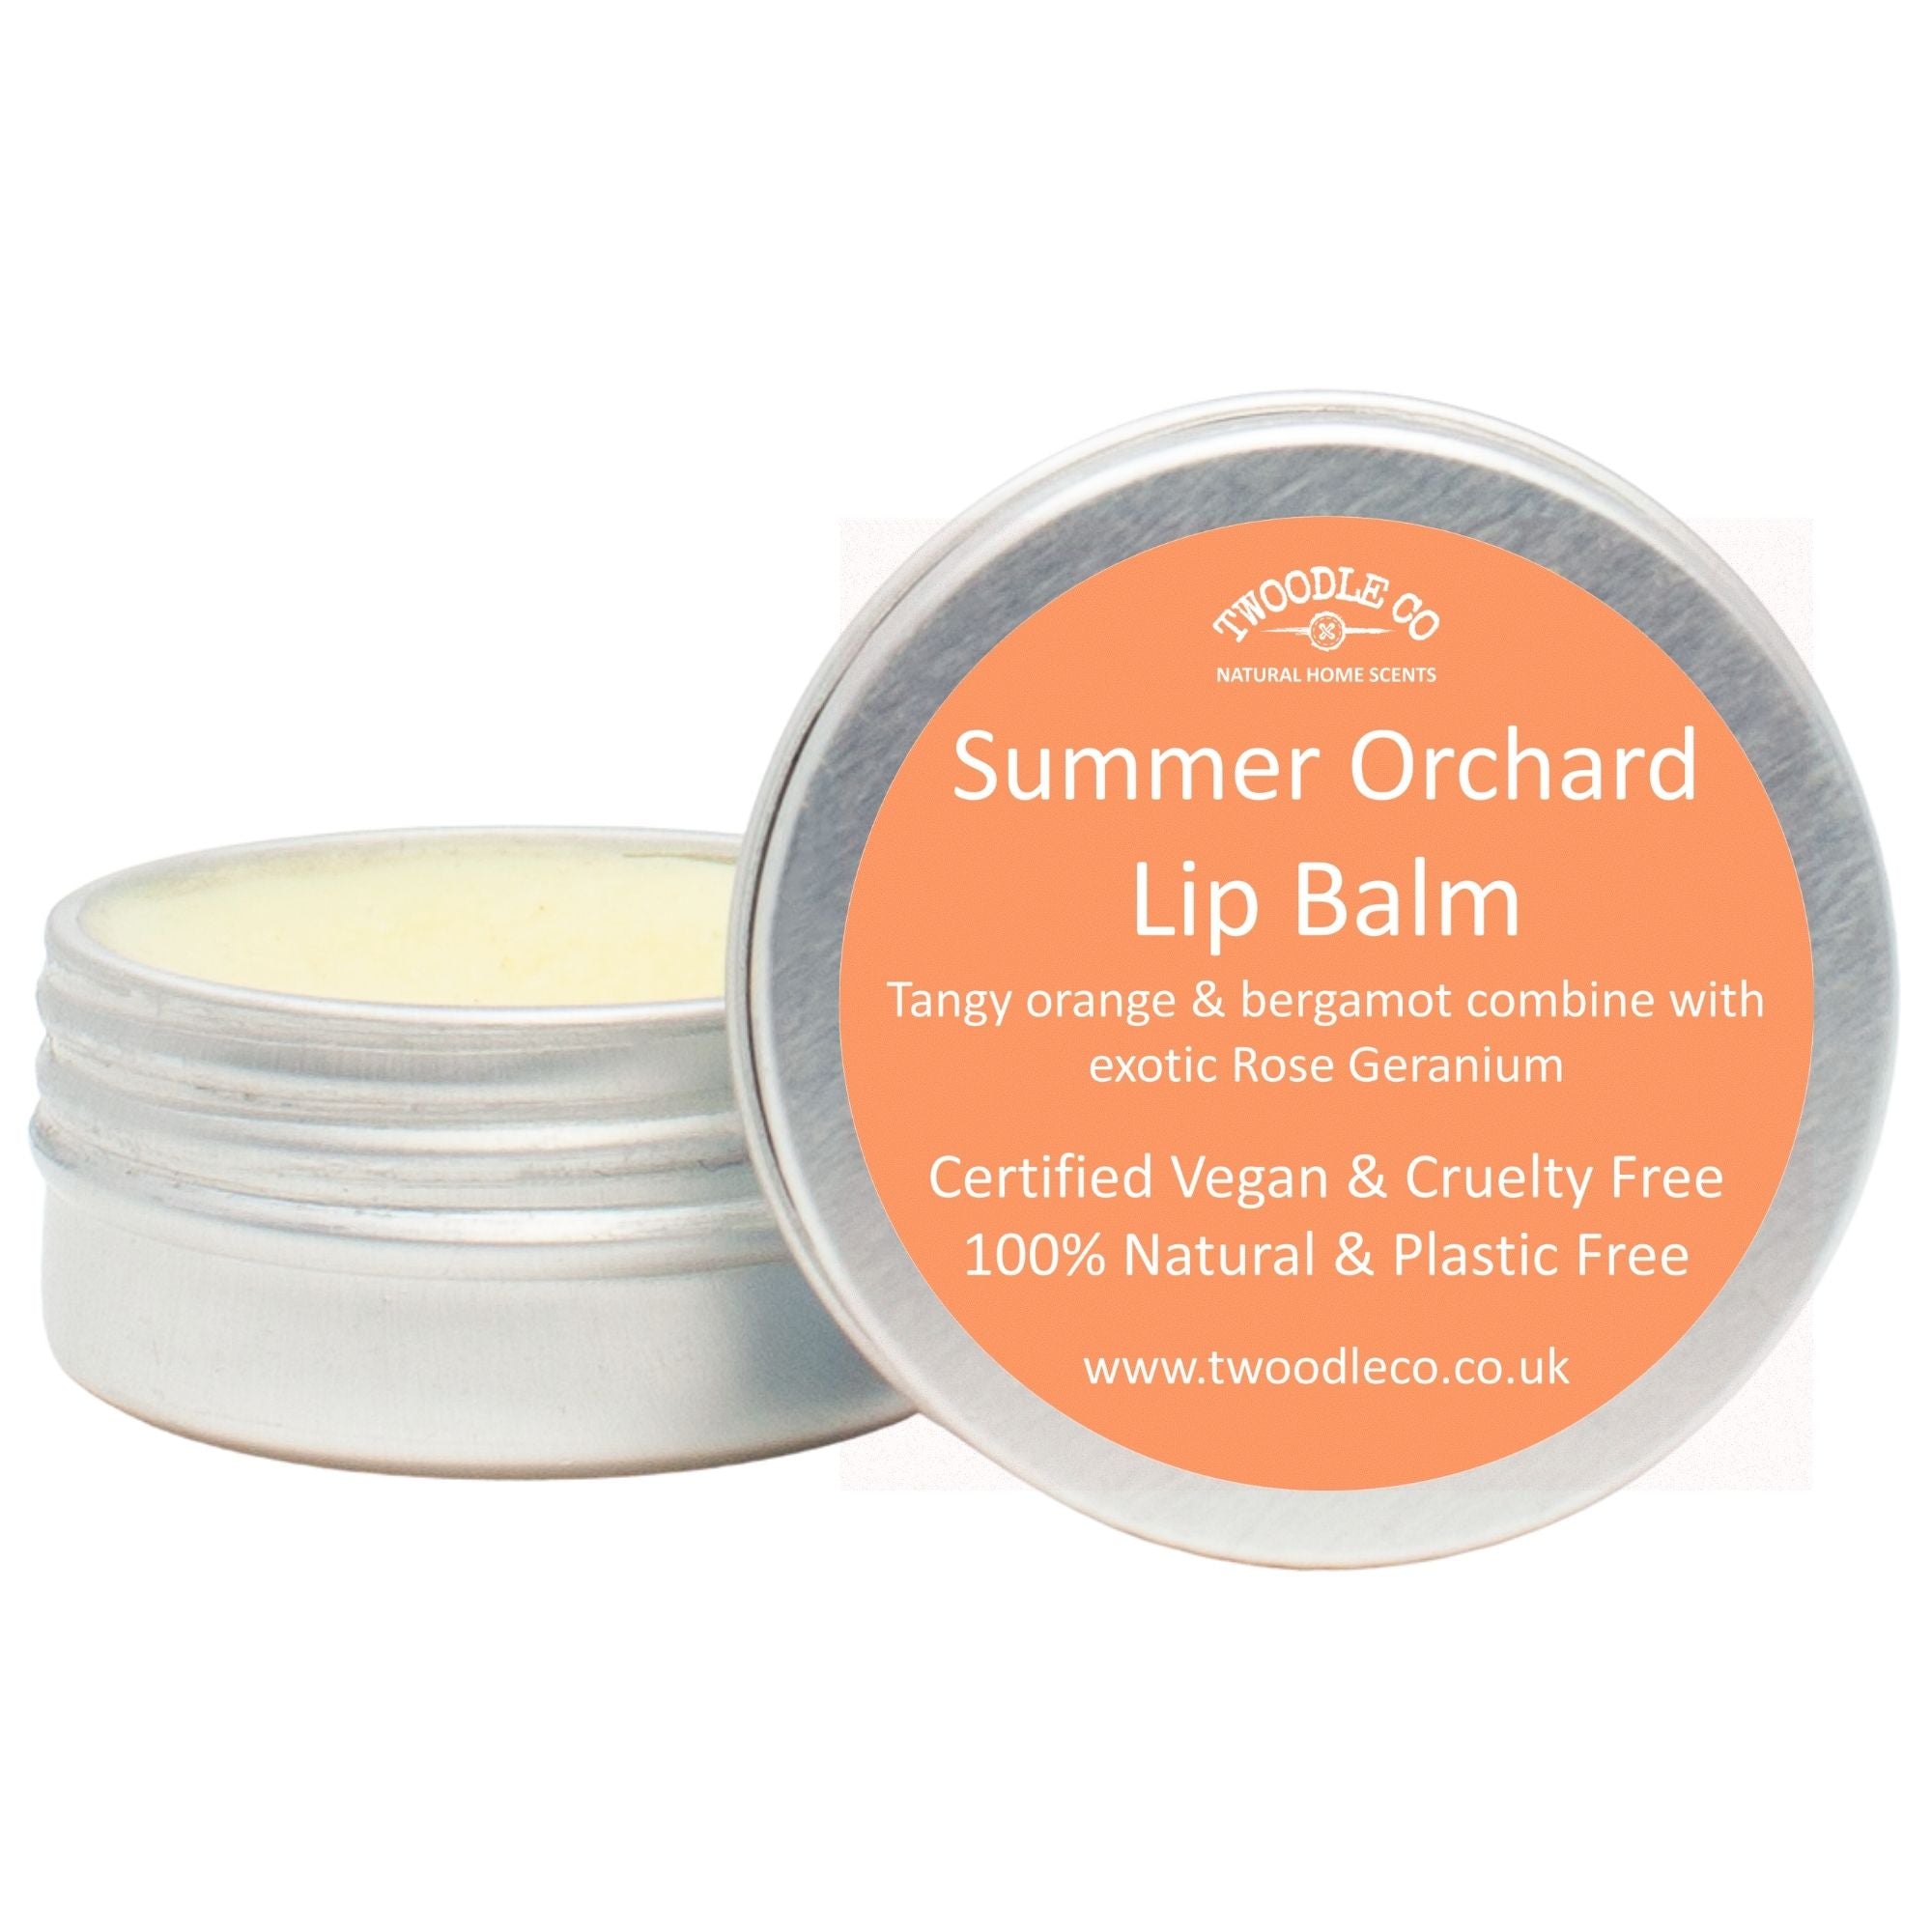 Twoodle Summer Orchard Lip Balm